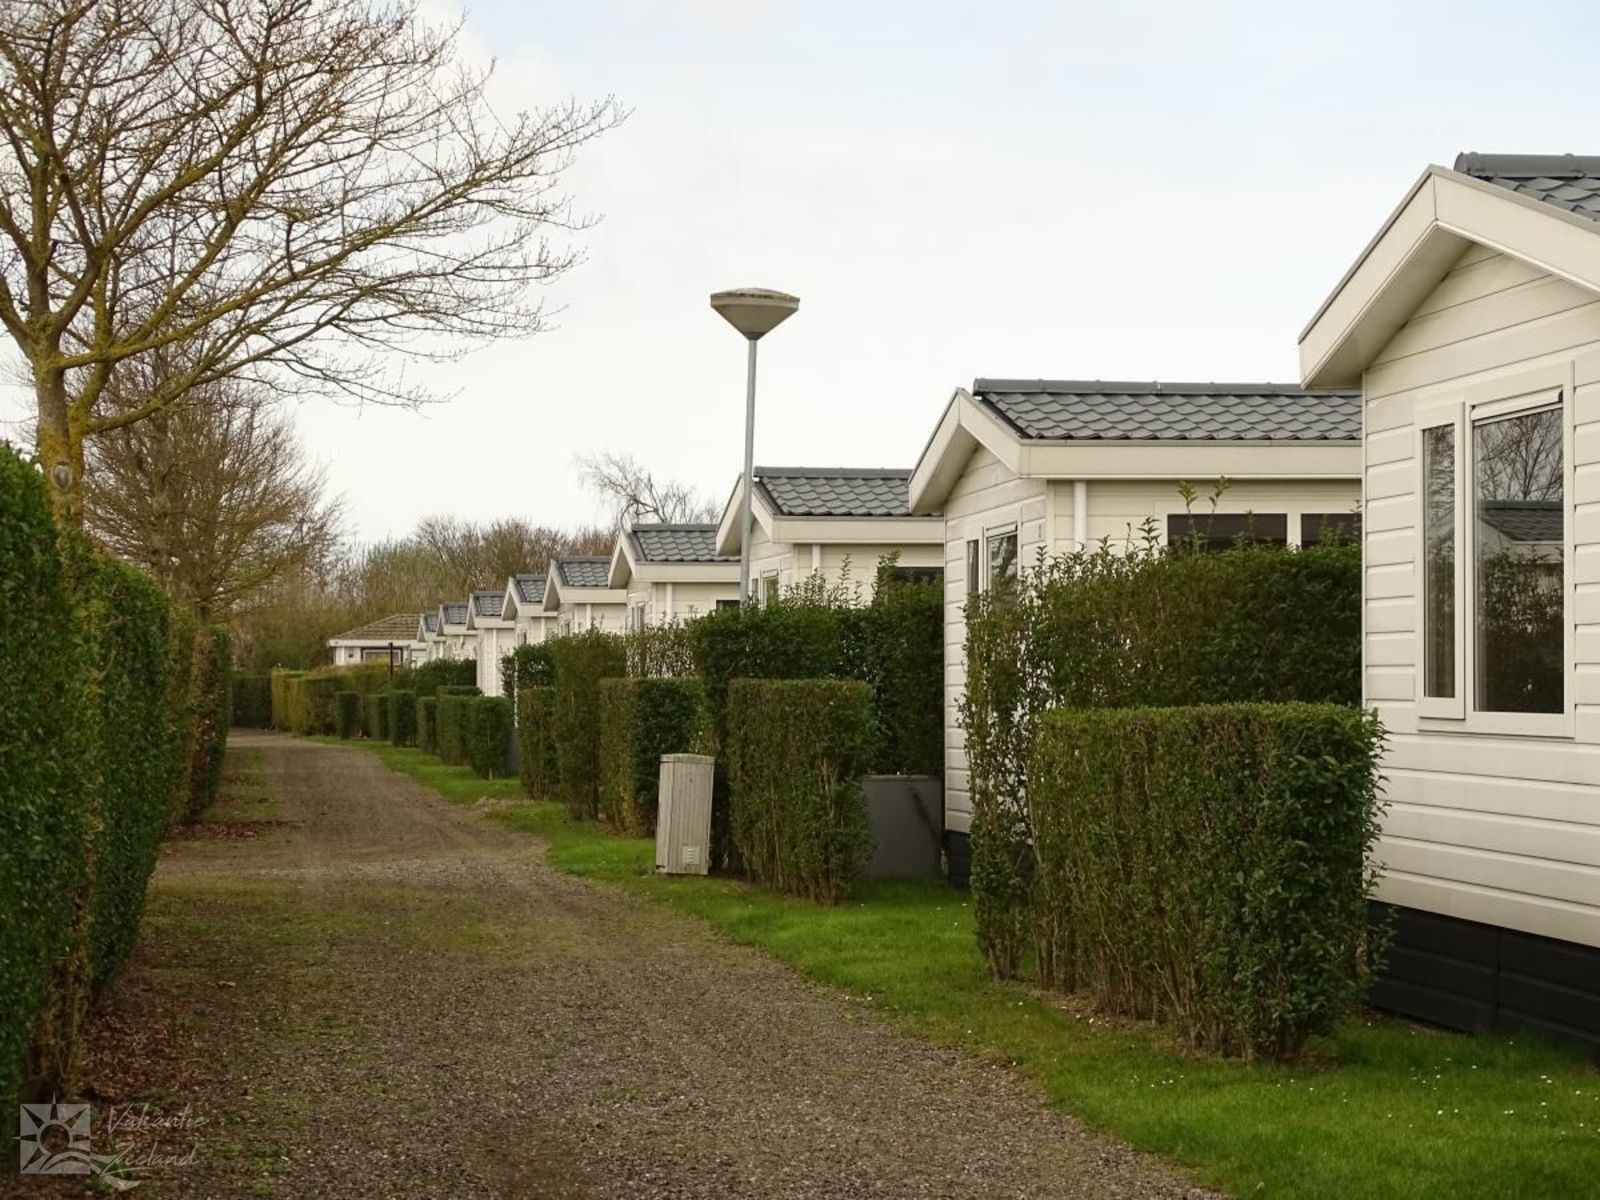 Accommodations at Zonneweelde